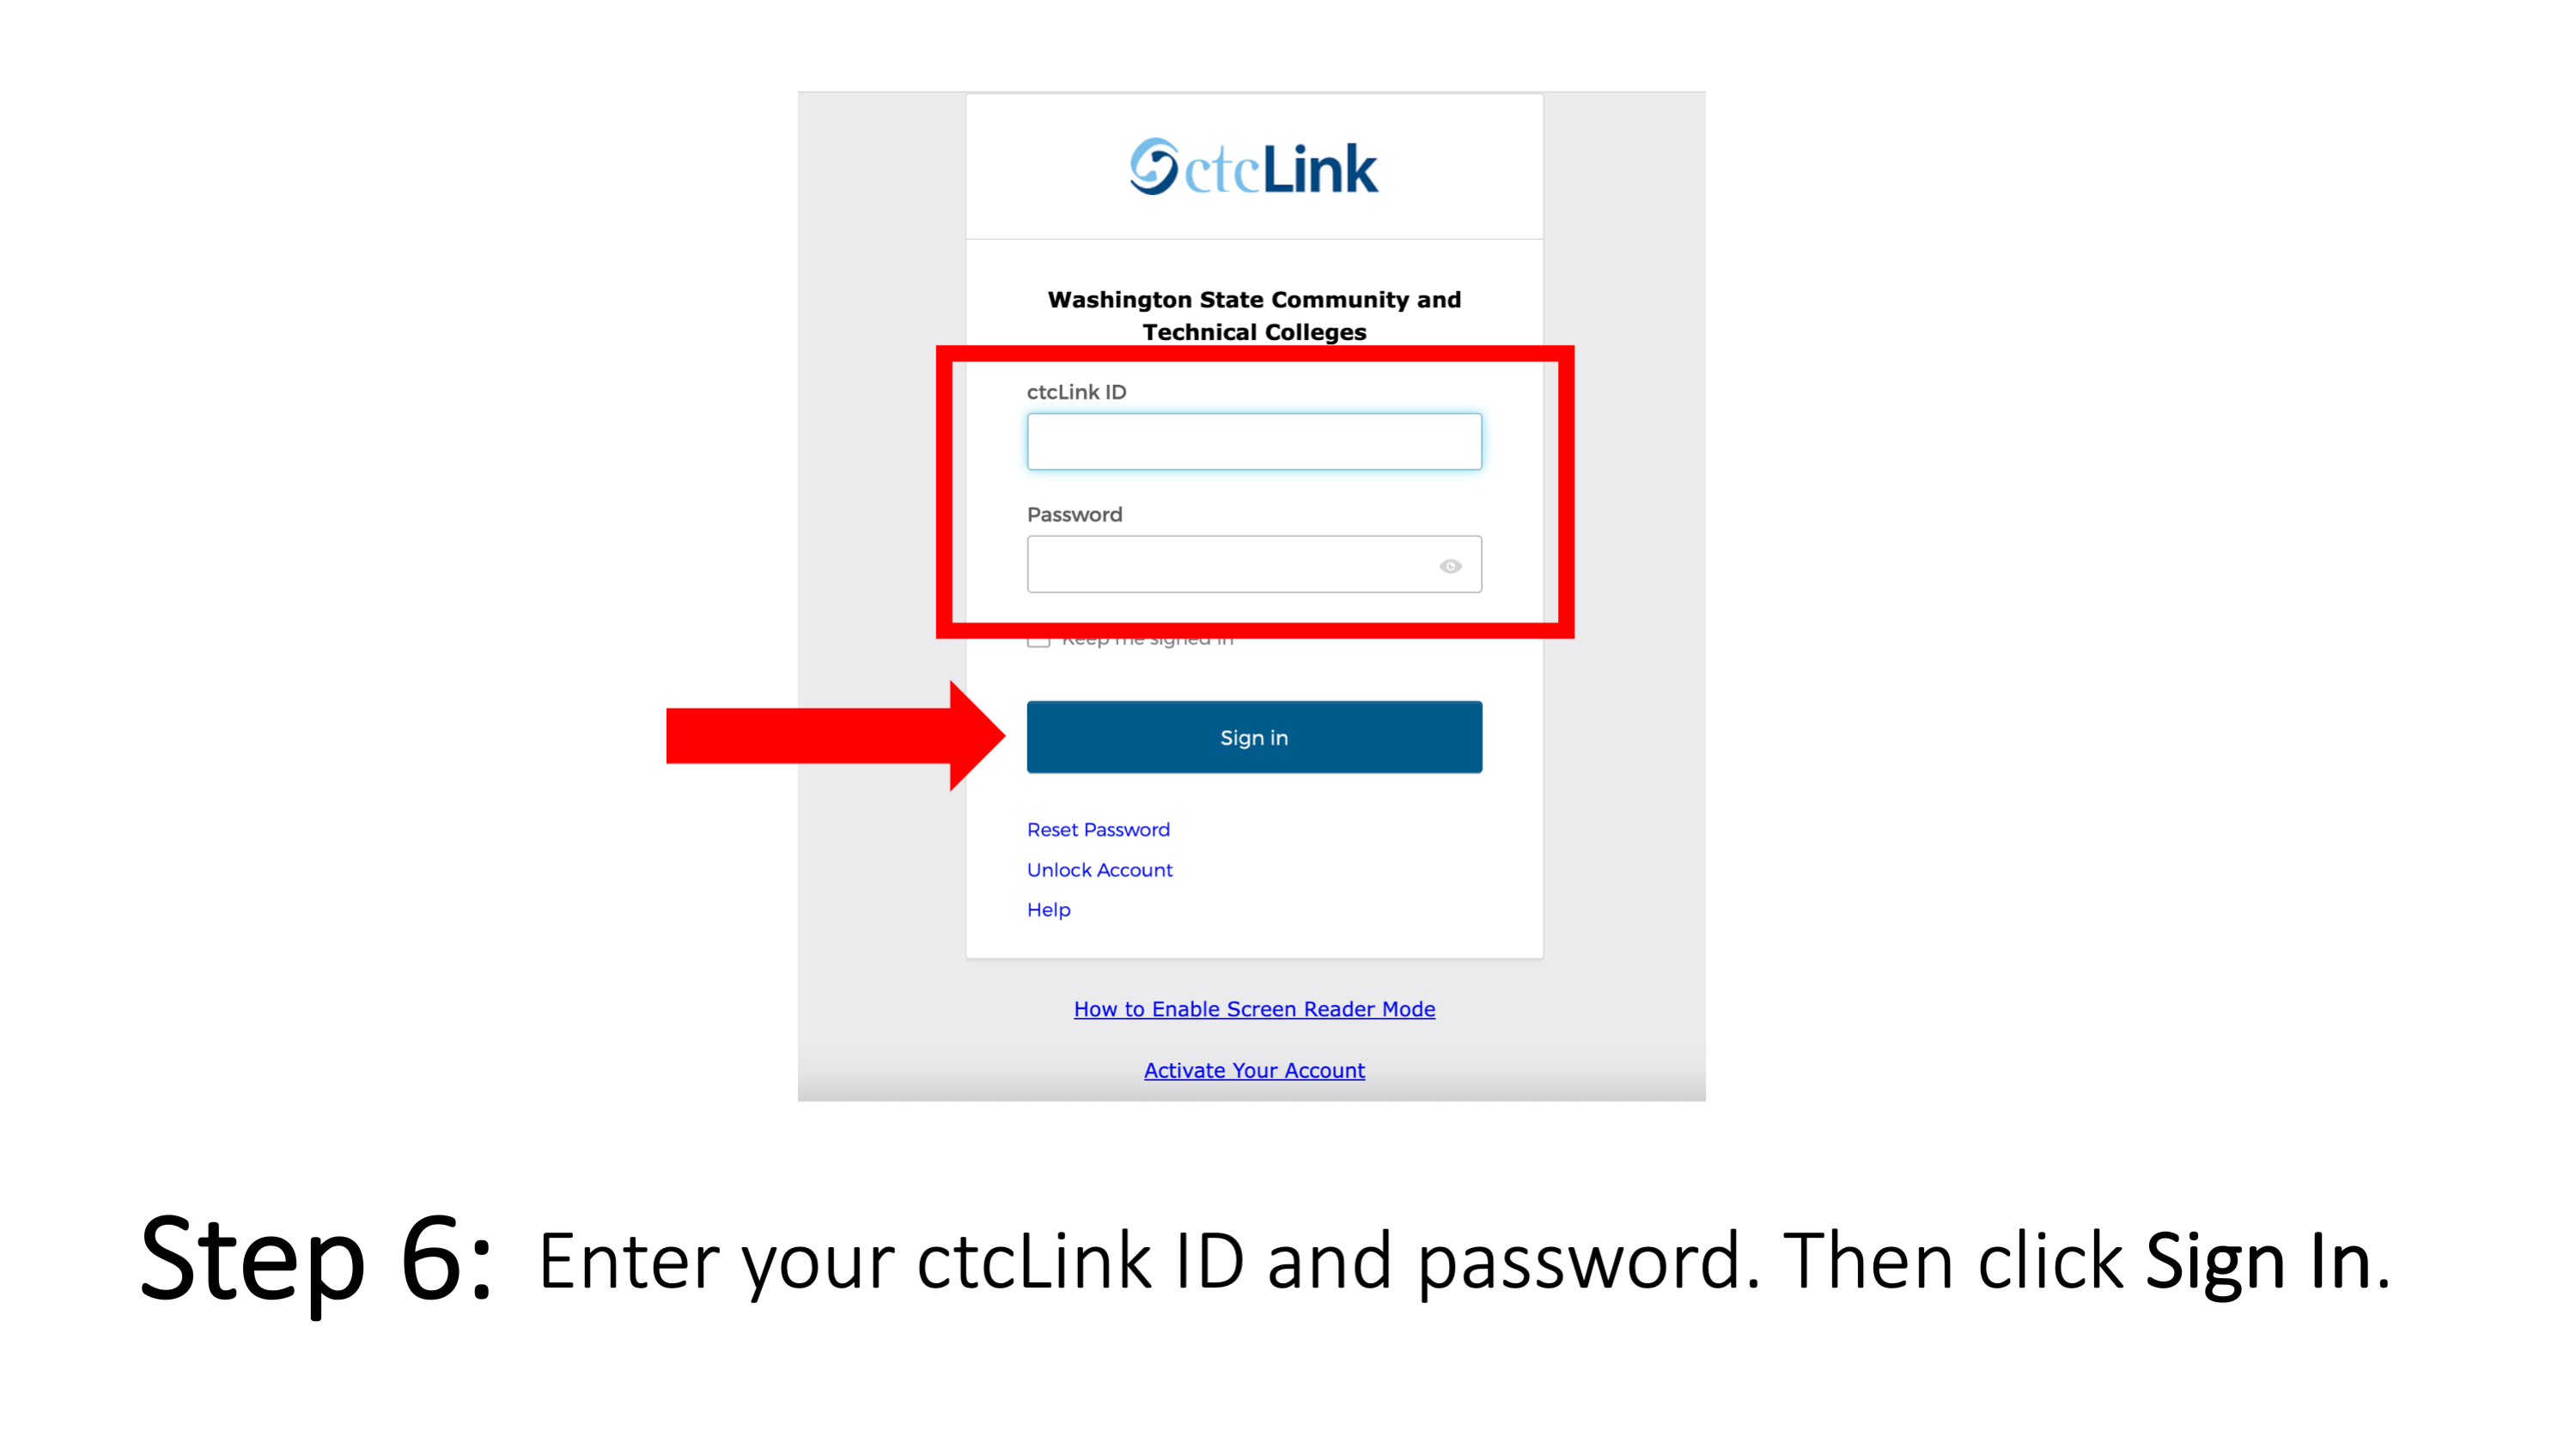 Step 6: Enter your ctcLink ID and password. Then click Sign In.